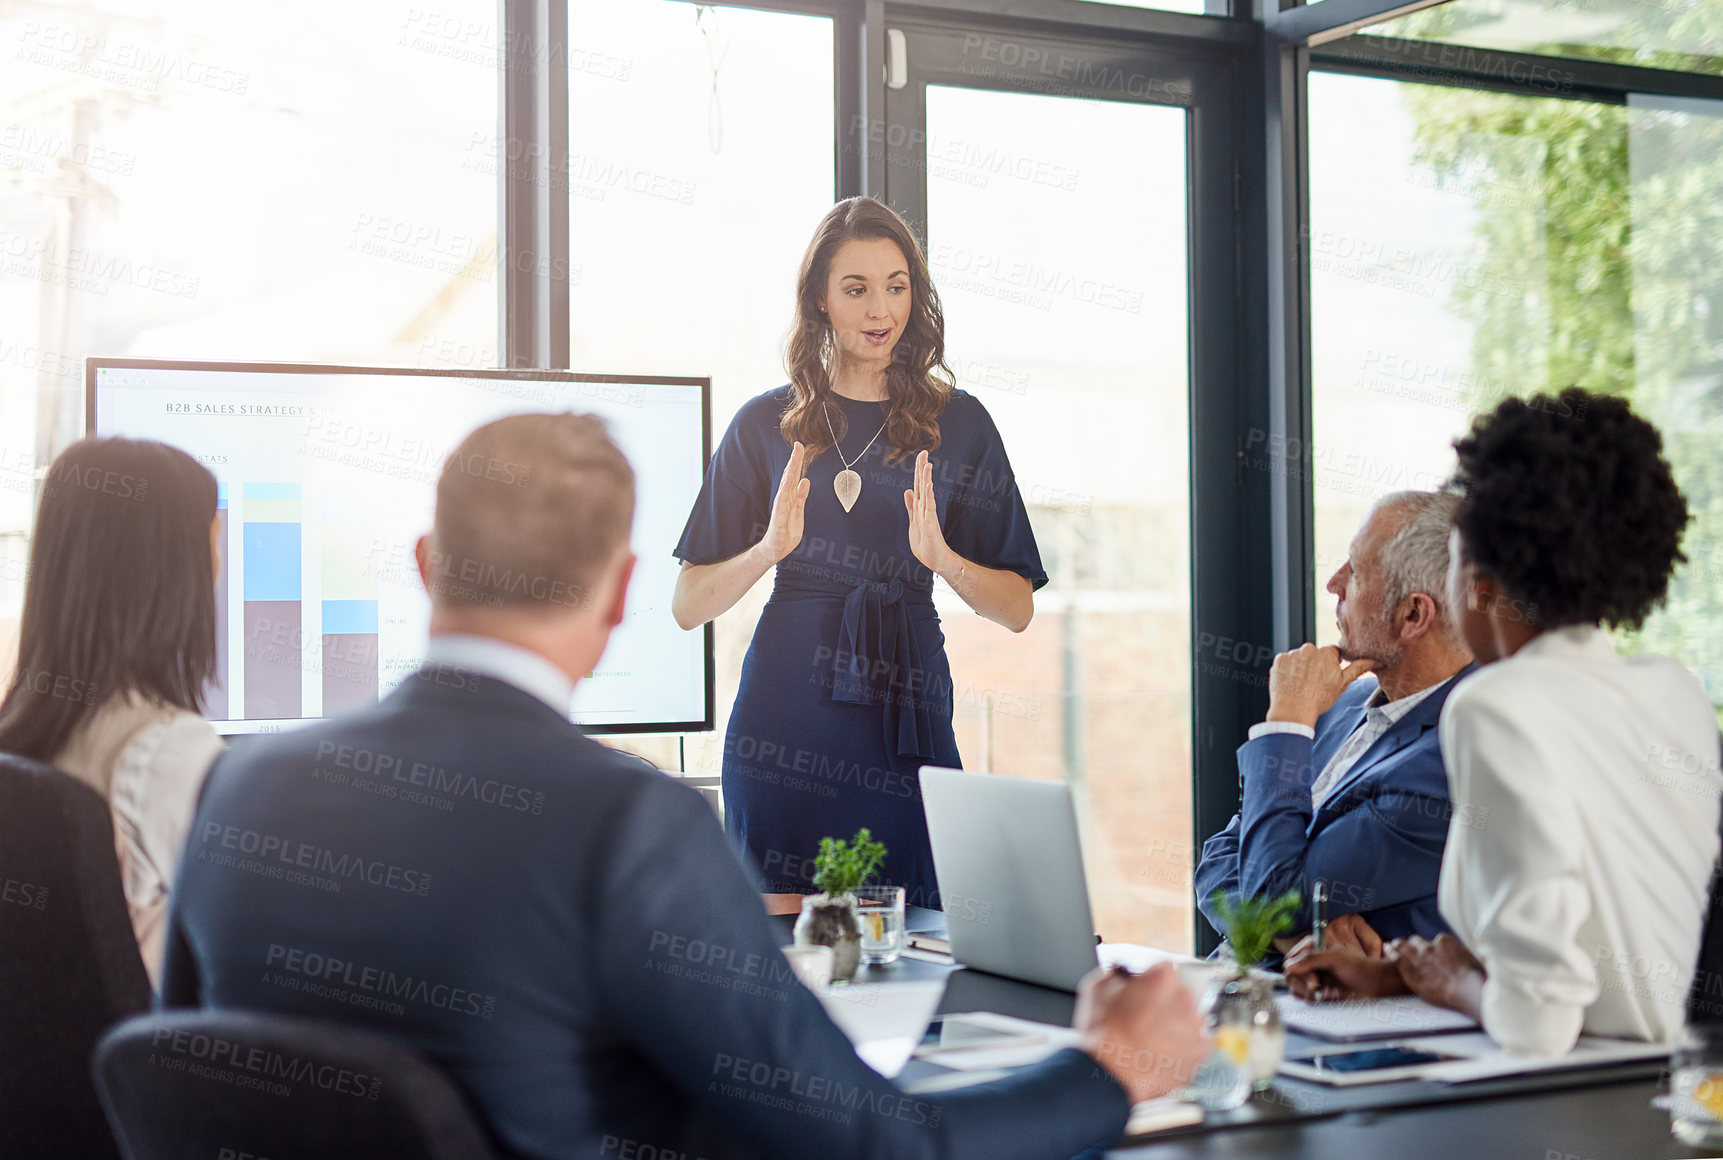 Buy stock photo Cropped shot of a businesswoman giving a presentation in a boardroom